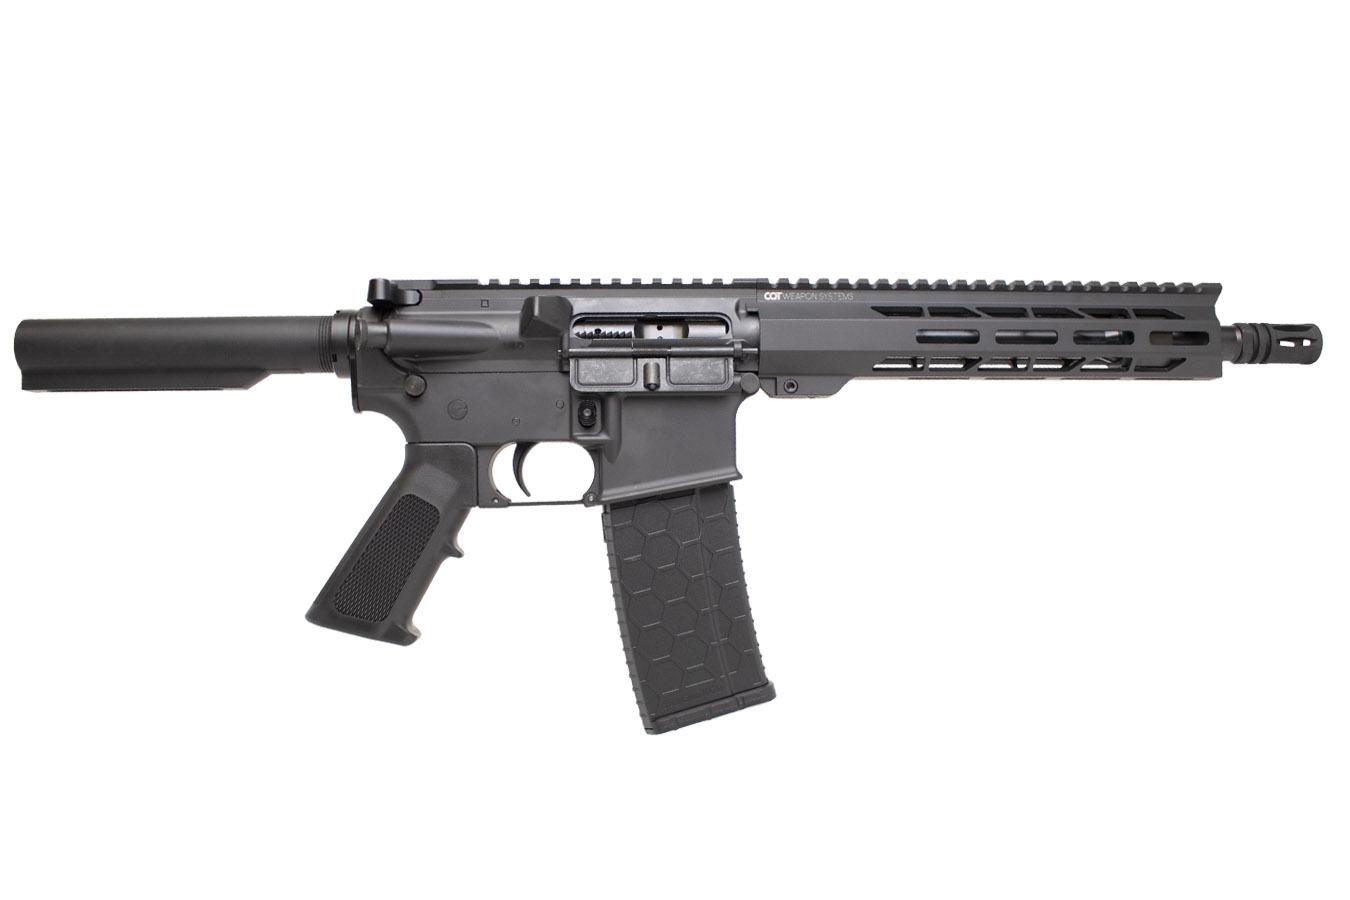 No. 33 Best Selling: CQT WEAPON SYSTEMS CQT15 5.56MM 10.5` BARREL